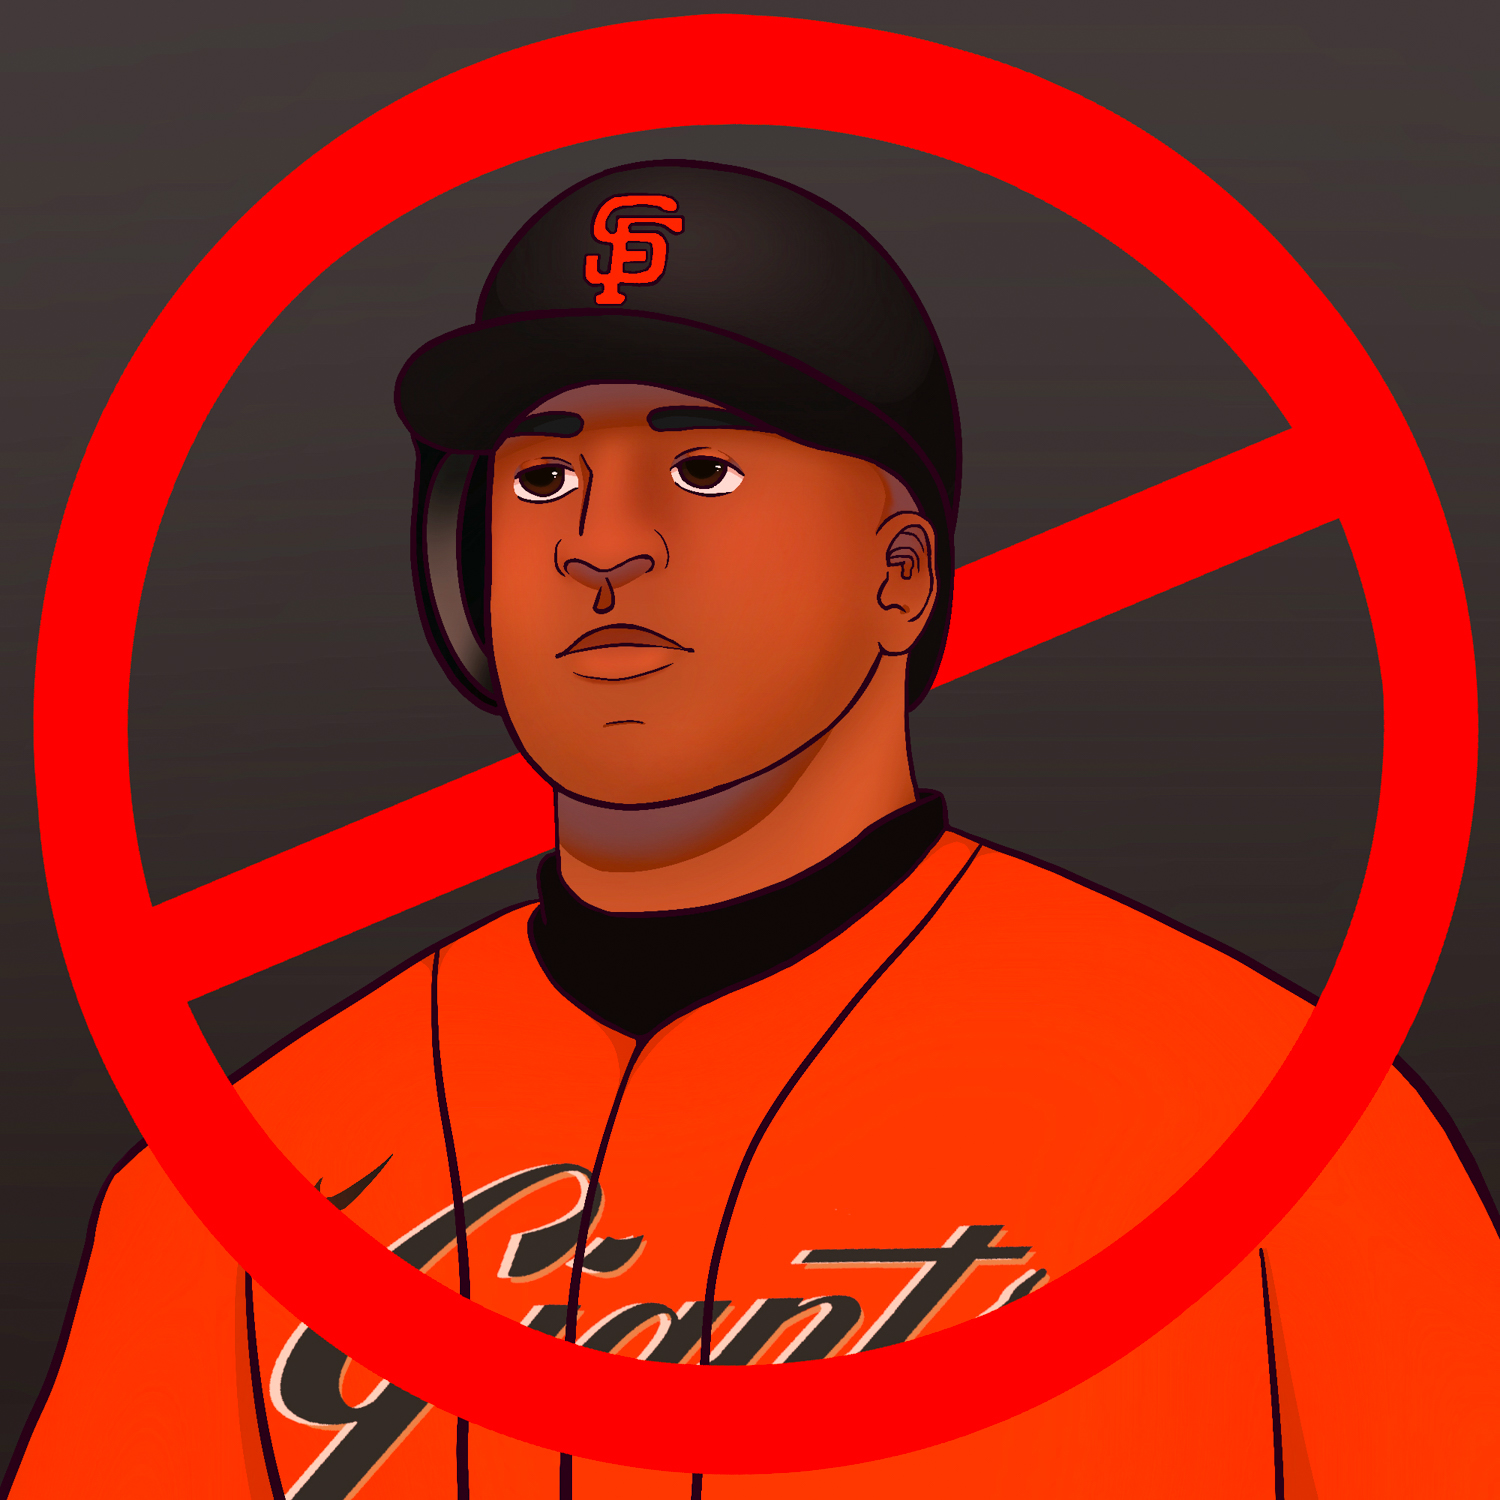 Barry Bonds is a Hall of Famer, maybe – The Vernois News